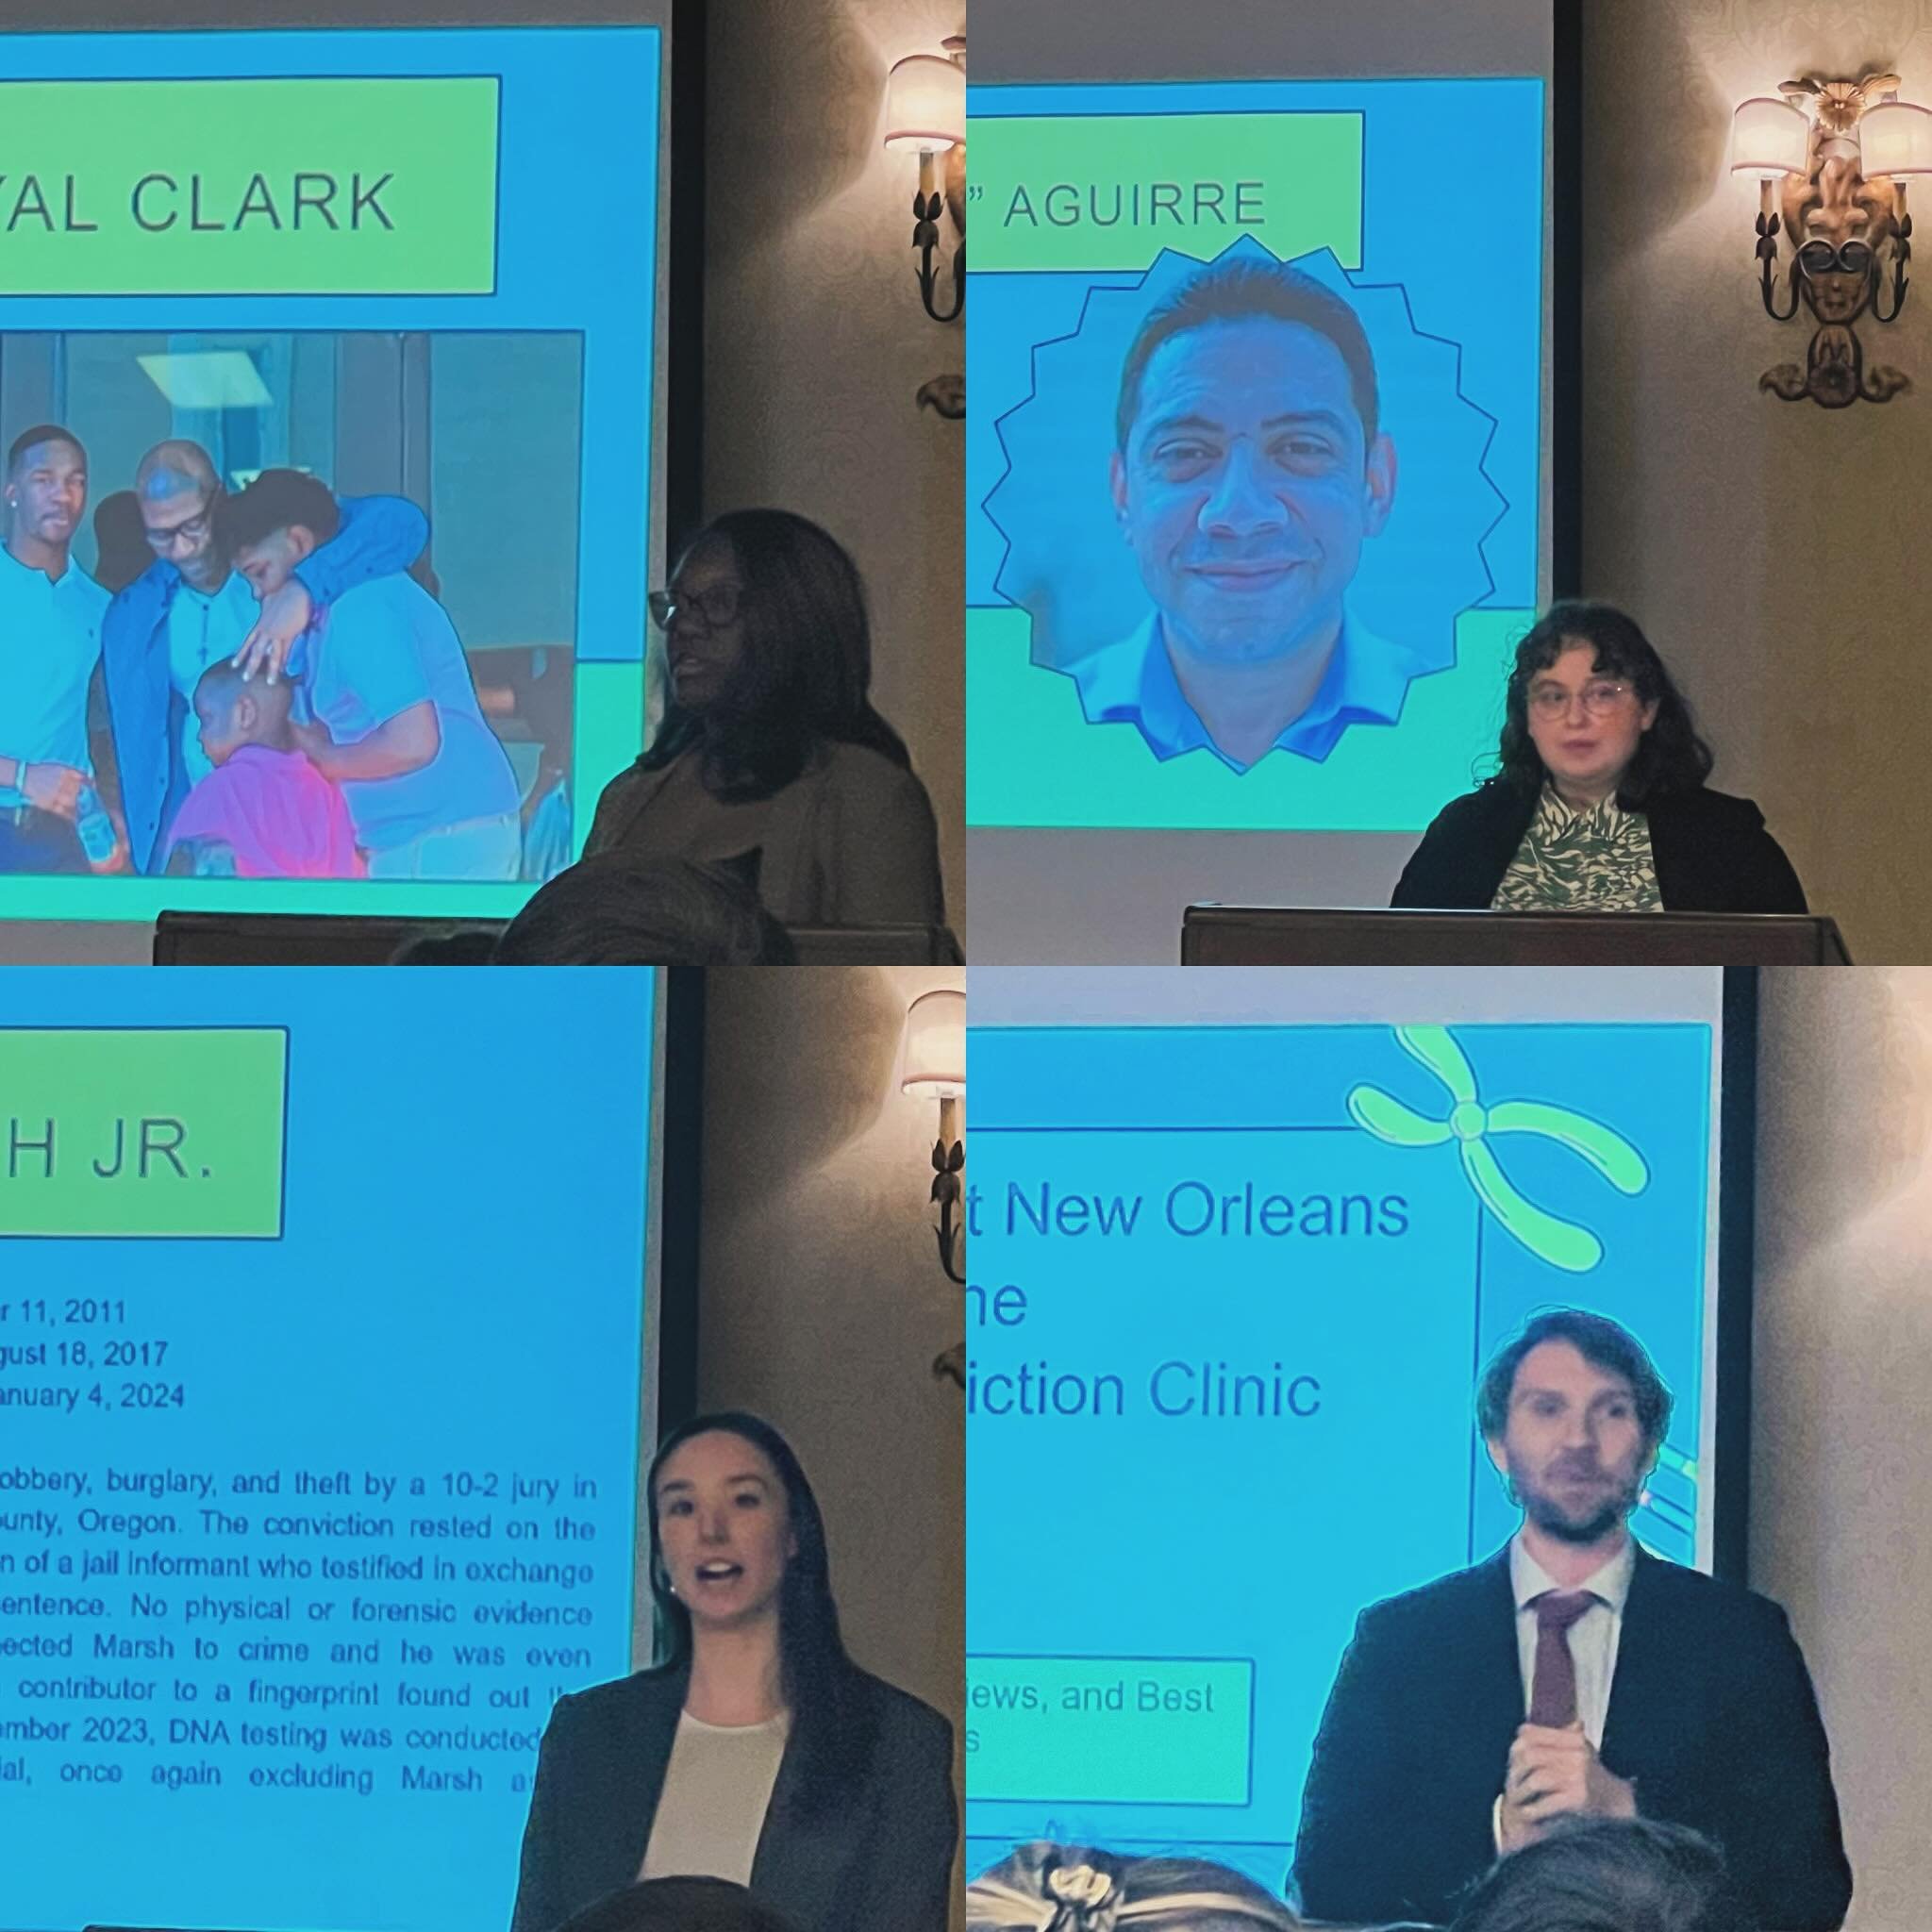 A dynamic team presentation yesterday by Innocence Project New Orleans! Let&rsquo;s meet the driving forces behind this impactful initiative:

🔍 Zac Crawford: A dedicated Staff Attorney at Innocence Project New Orleans, Zac also serves as the Superv